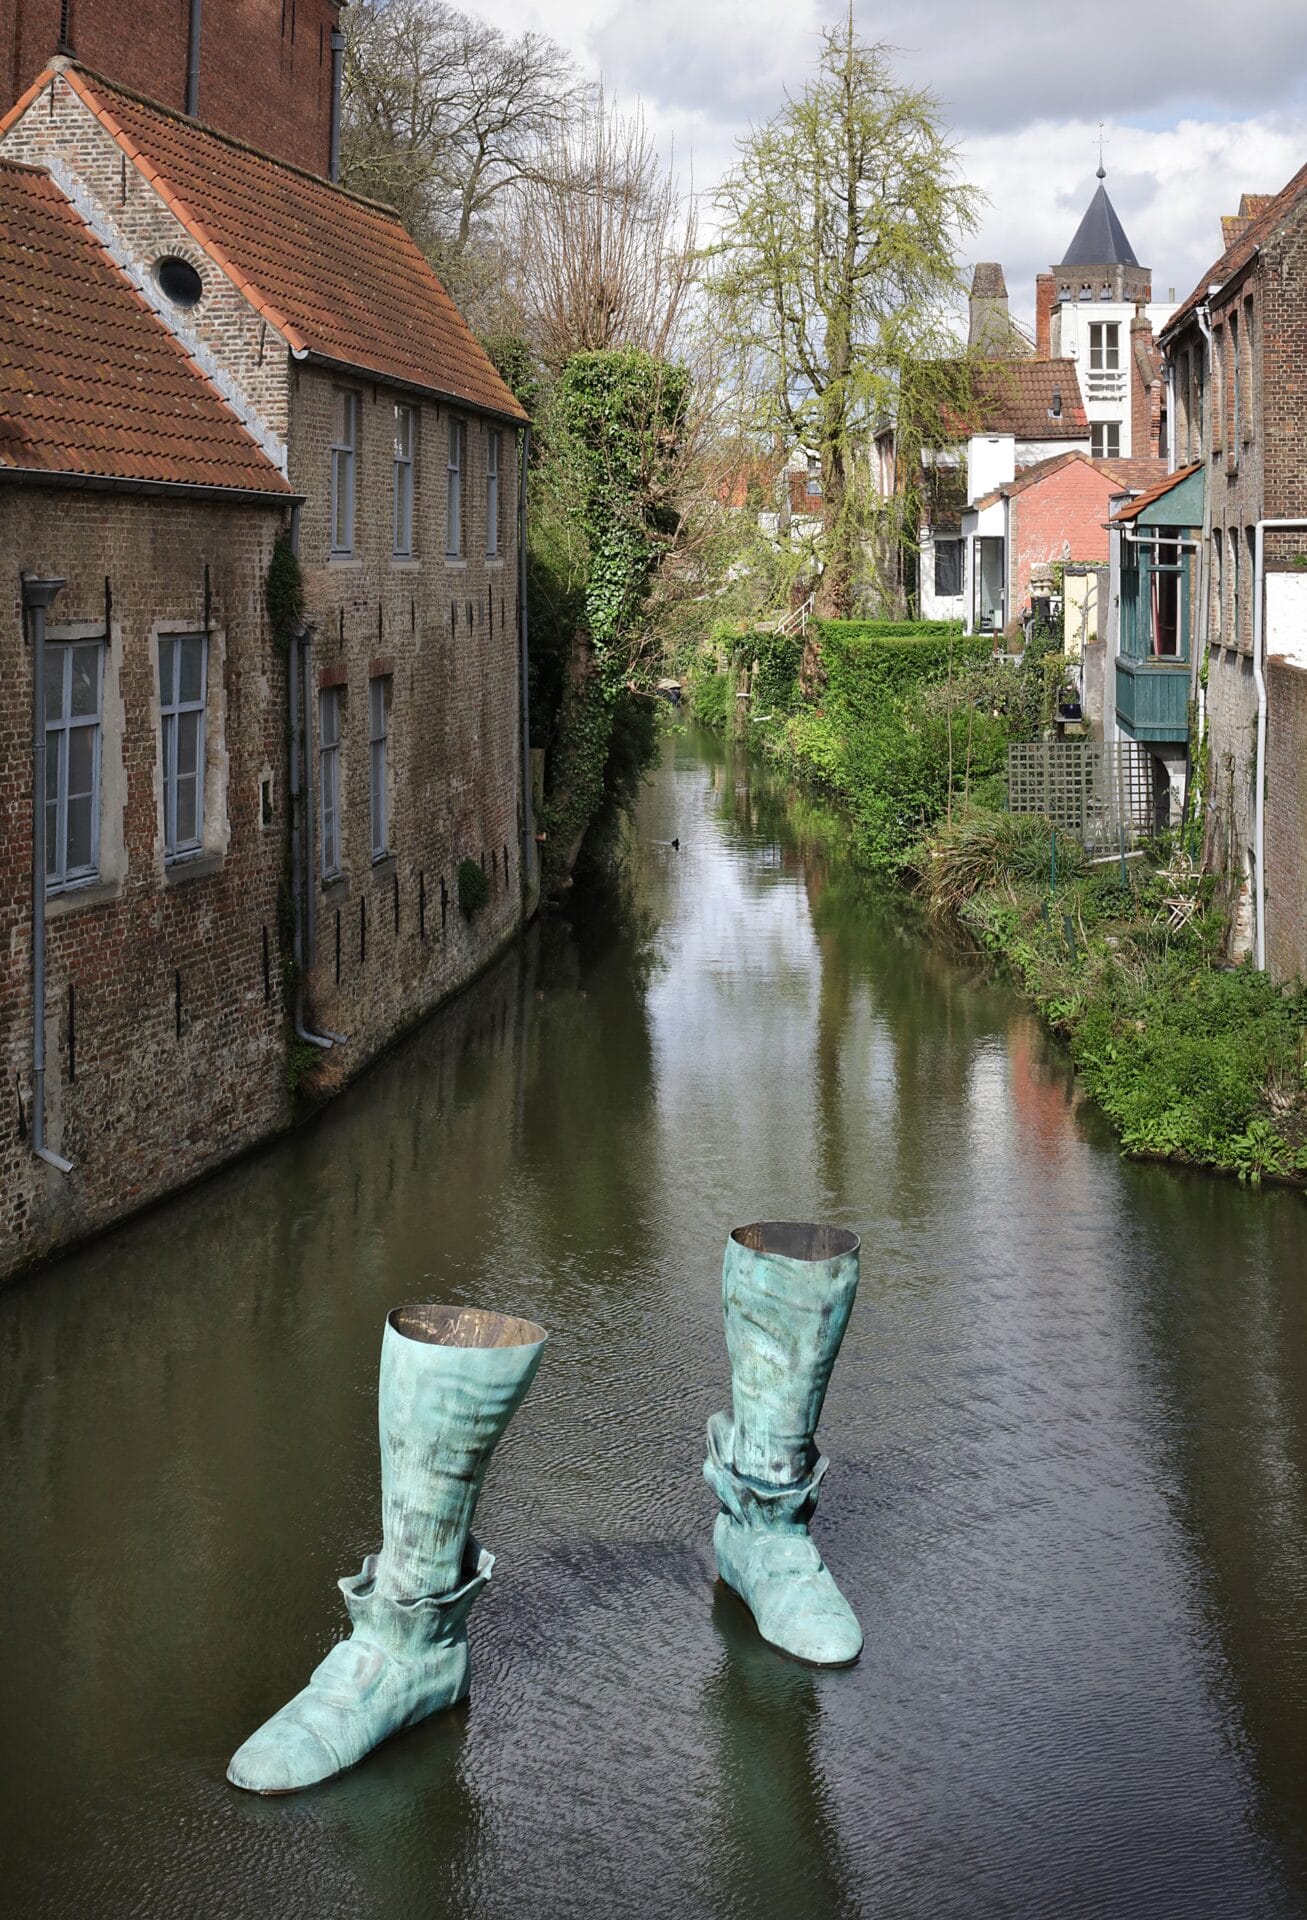 a sculpture of a pair of 18th-century style boots cast in bronze and installed in a Bruges canal